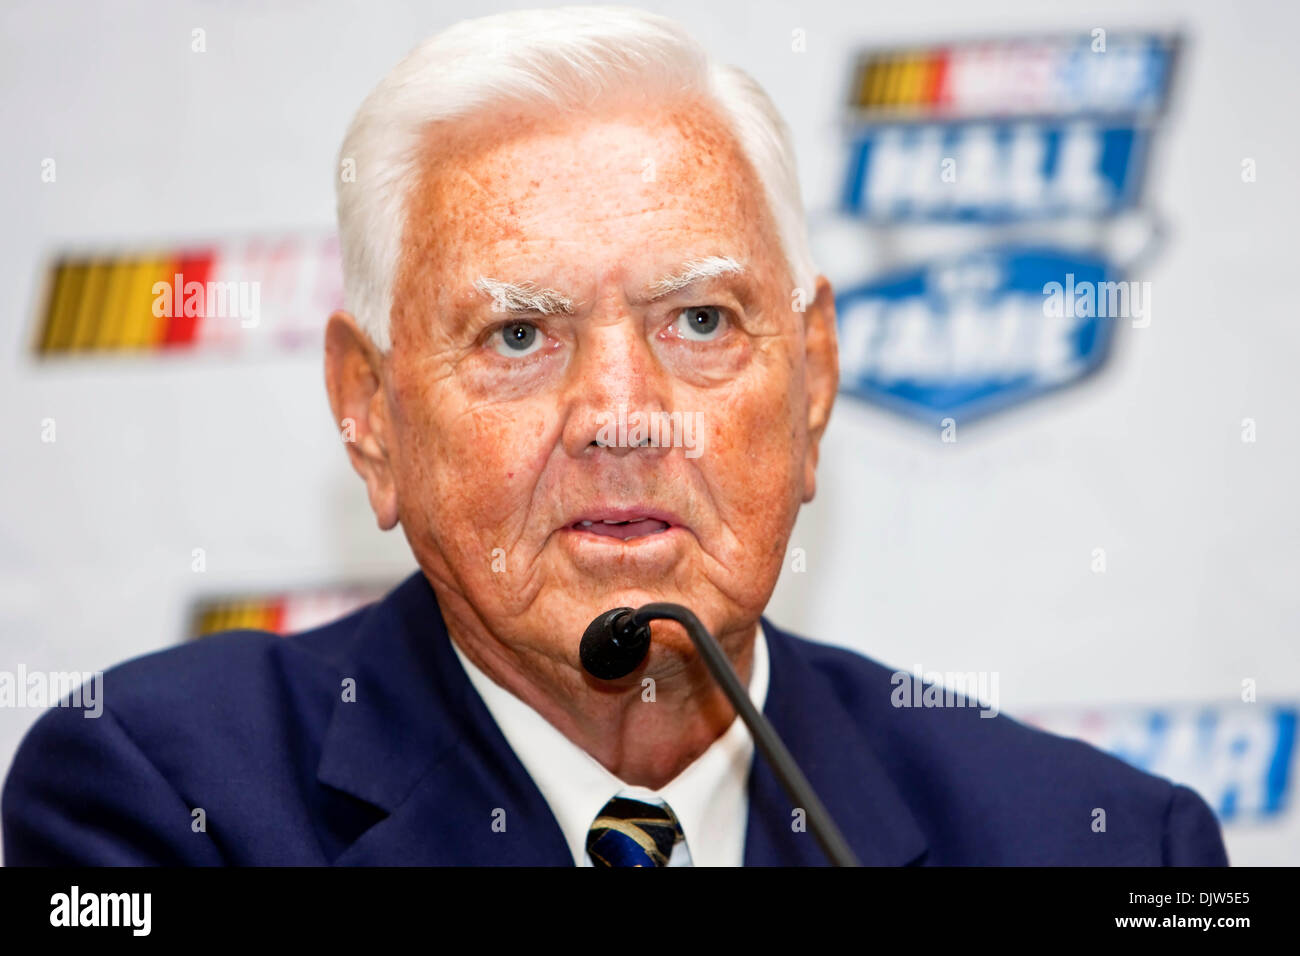 Junior Johnson speaks in the media room during the Inaugural NASCAR Hall Of Fame Induction at the new Hall Of Fame building in Charlotte, North Carolina. (Credit Image: © Leon Switzer/Southcreek Global/ZUMApress.com) Stock Photo